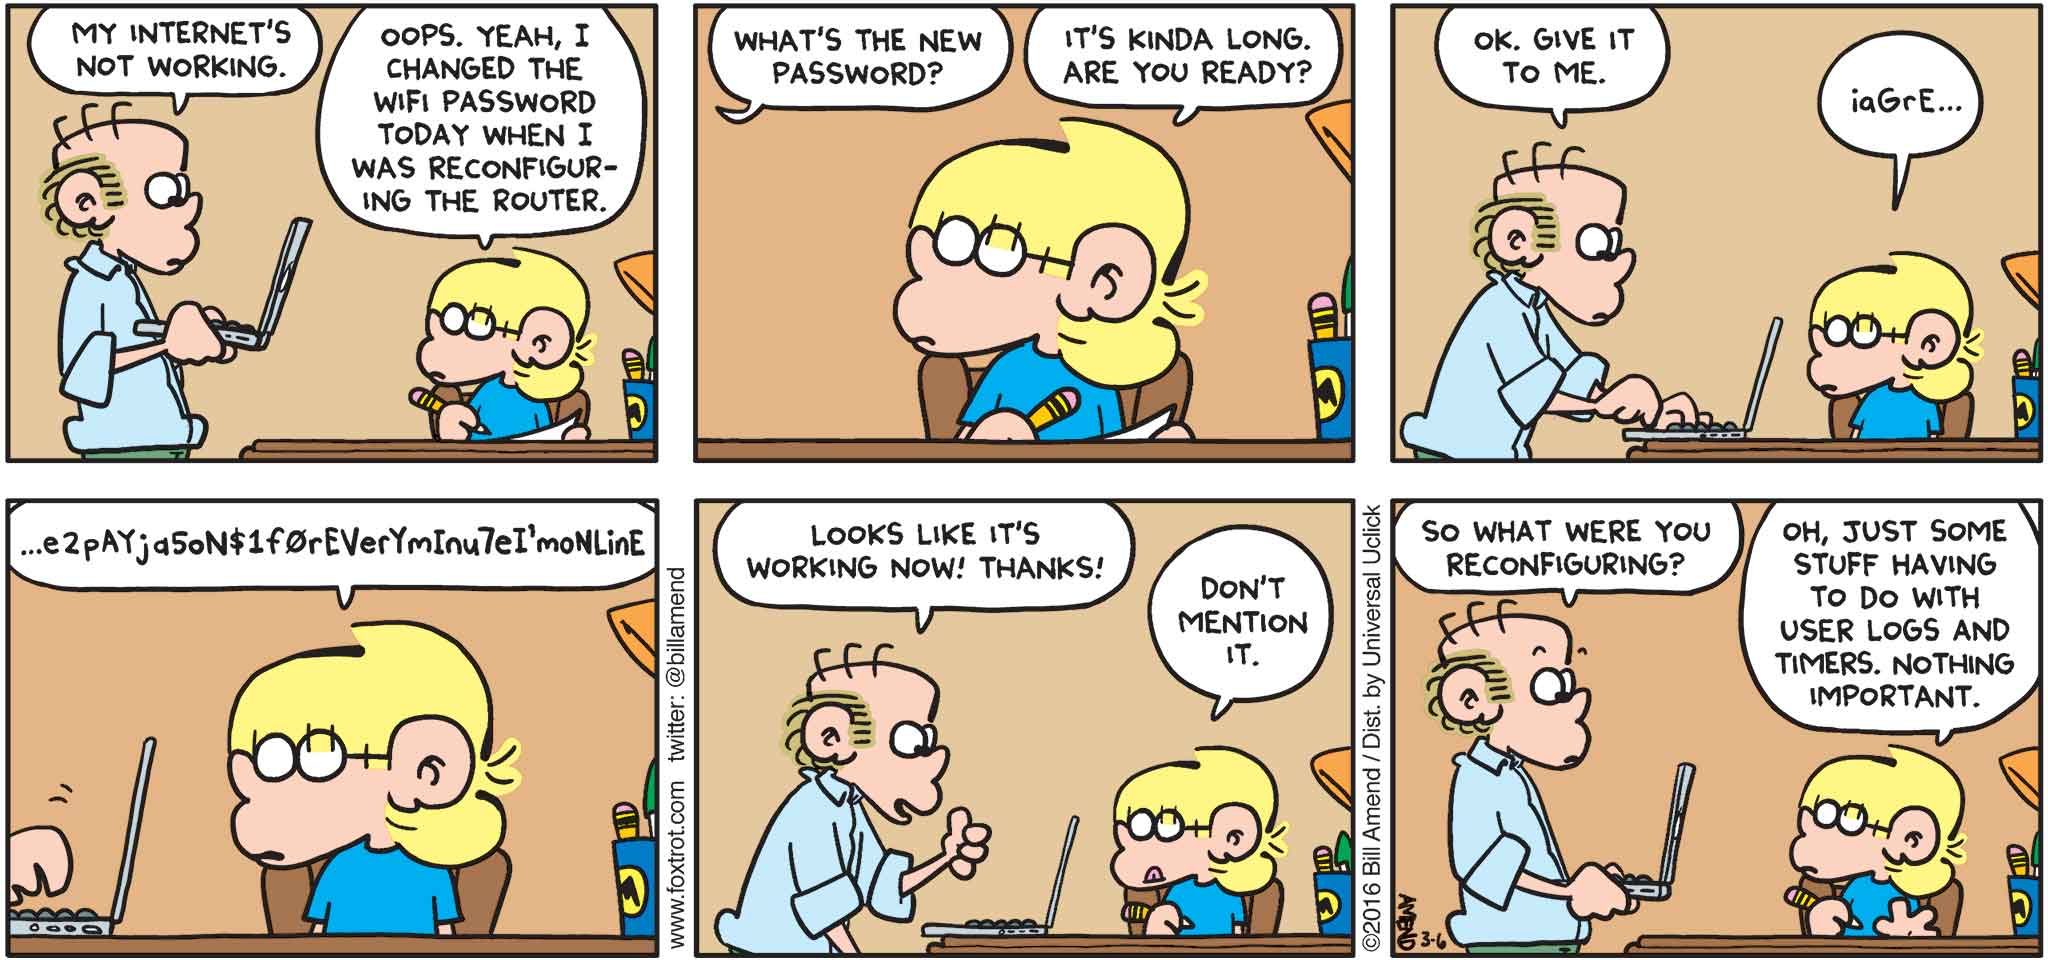 FoxTrot by Bill Amend - "$password" published March 6, 2016 - Roger: My internet's not working. Jason: Oops. Yeah, I changed the wifi passowrd today when I was reconfiguring the router. Roger: What's the new password? Jason: It's kinda long. Are you ready? Roger: Ok, give it to me. Jason: iaGrEe2pAYjaSoN$f0rEVerYmInu7eImoNlinE. Roger: Looks like it's working now! Thanks! Jason: Don't mention it. Roger: So what were you reconfiguring? Jason: Oh, just some stuff having to do with user logs and timers. Nothing important.